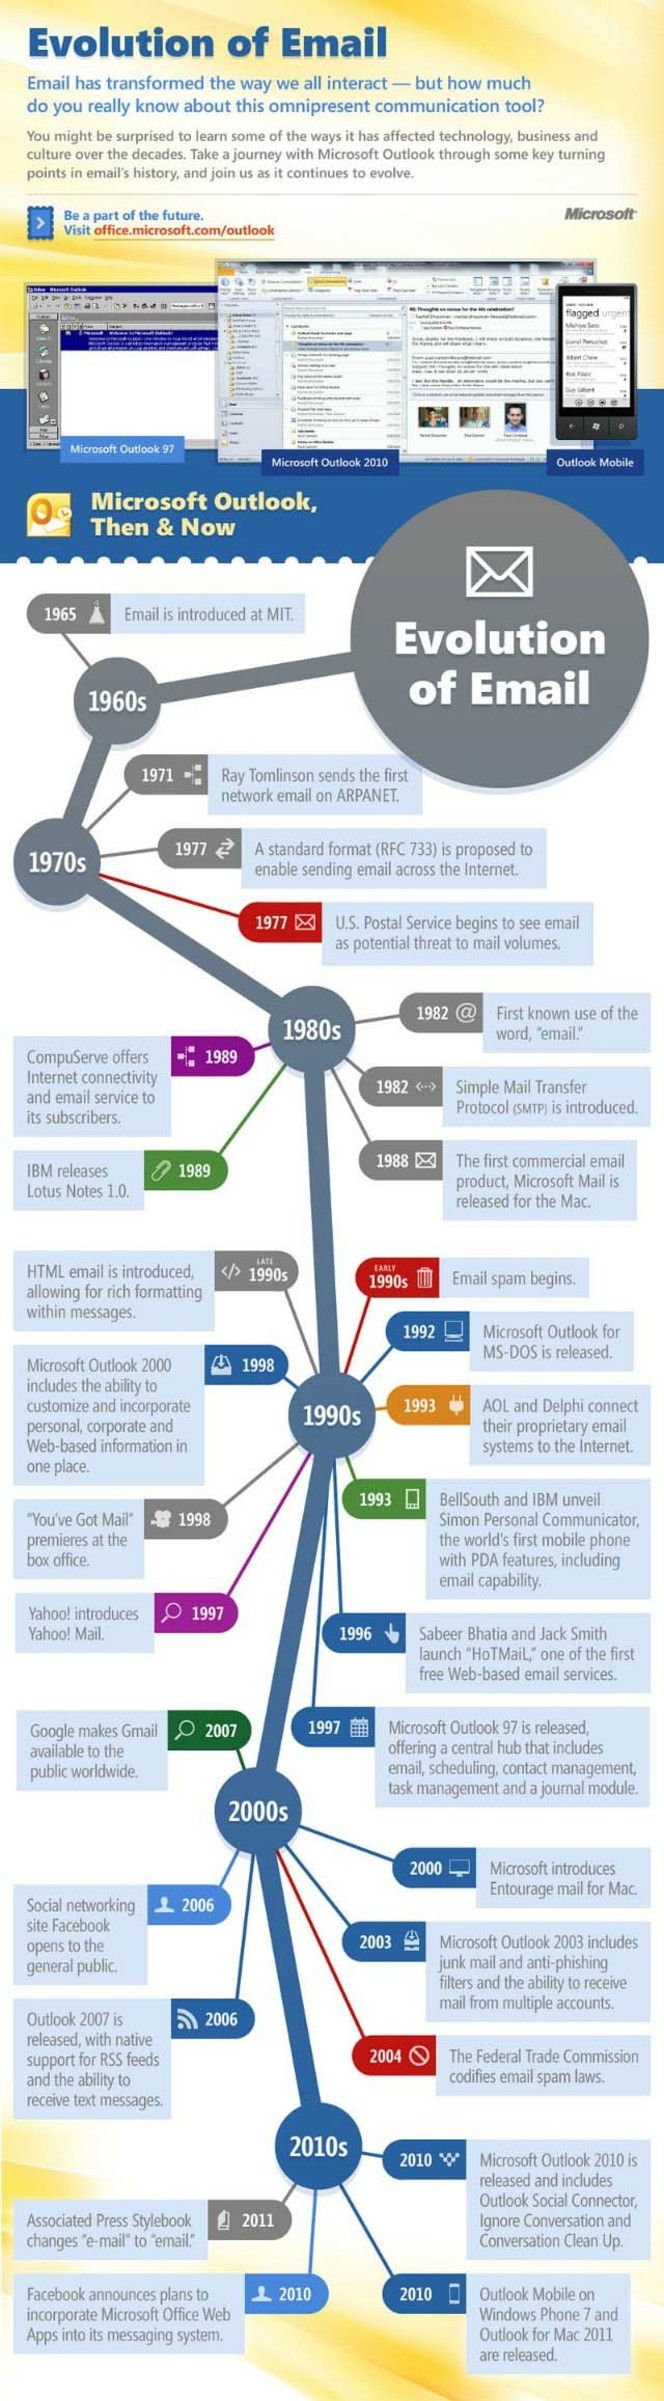 evolution-email-history